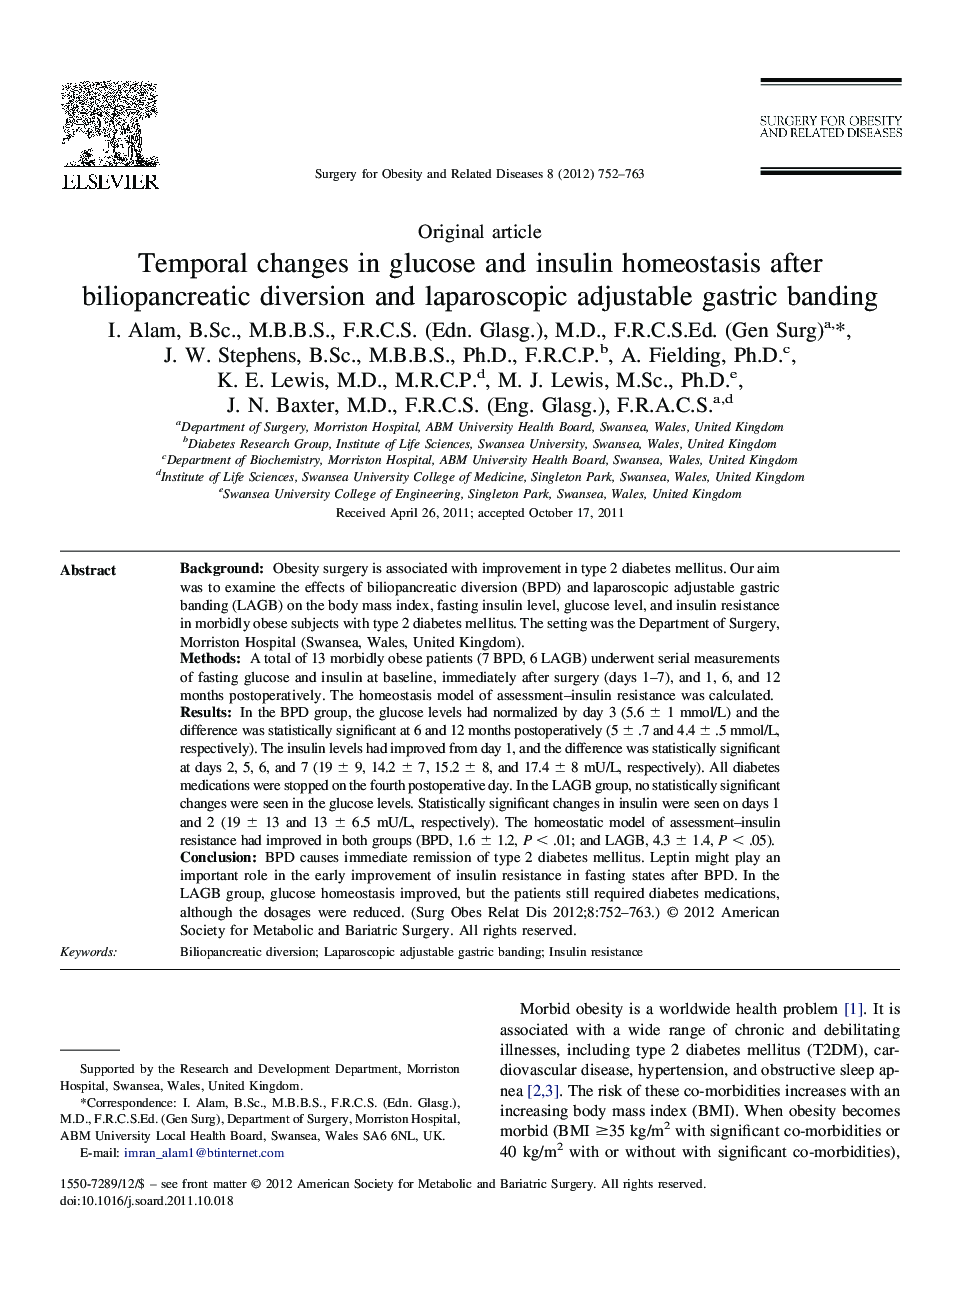 Temporal changes in glucose and insulin homeostasis after biliopancreatic diversion and laparoscopic adjustable gastric banding